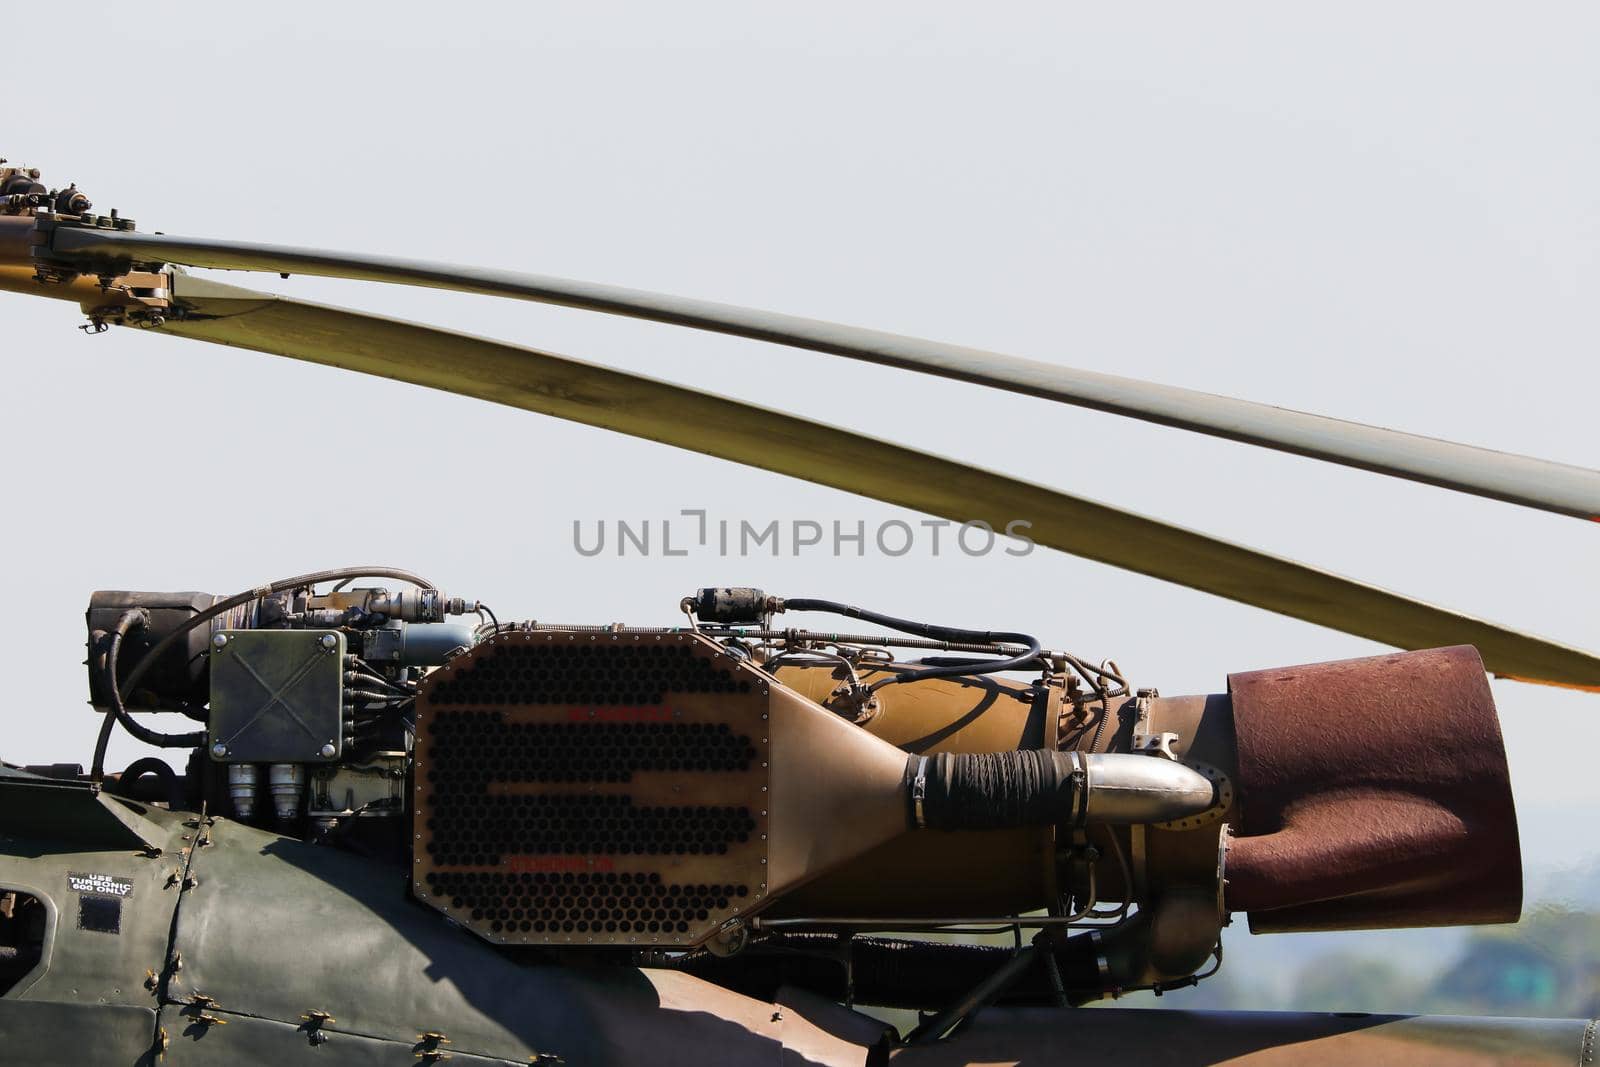 Alouette III helicopter's engine with air intake filter and blades close-up, South Africa